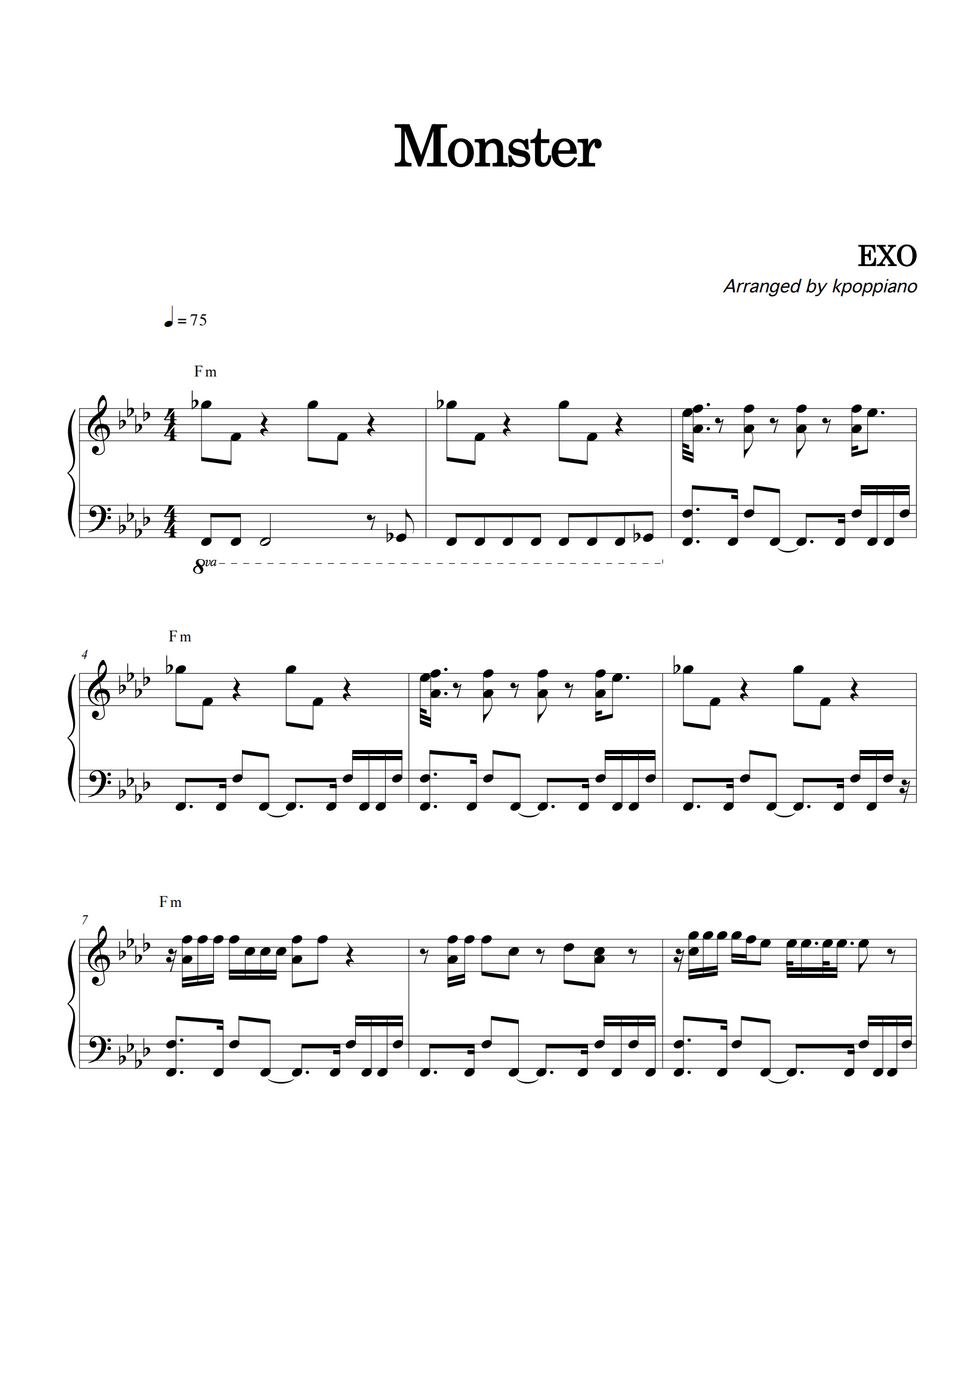 EXO - Monster by KPOP PIANO